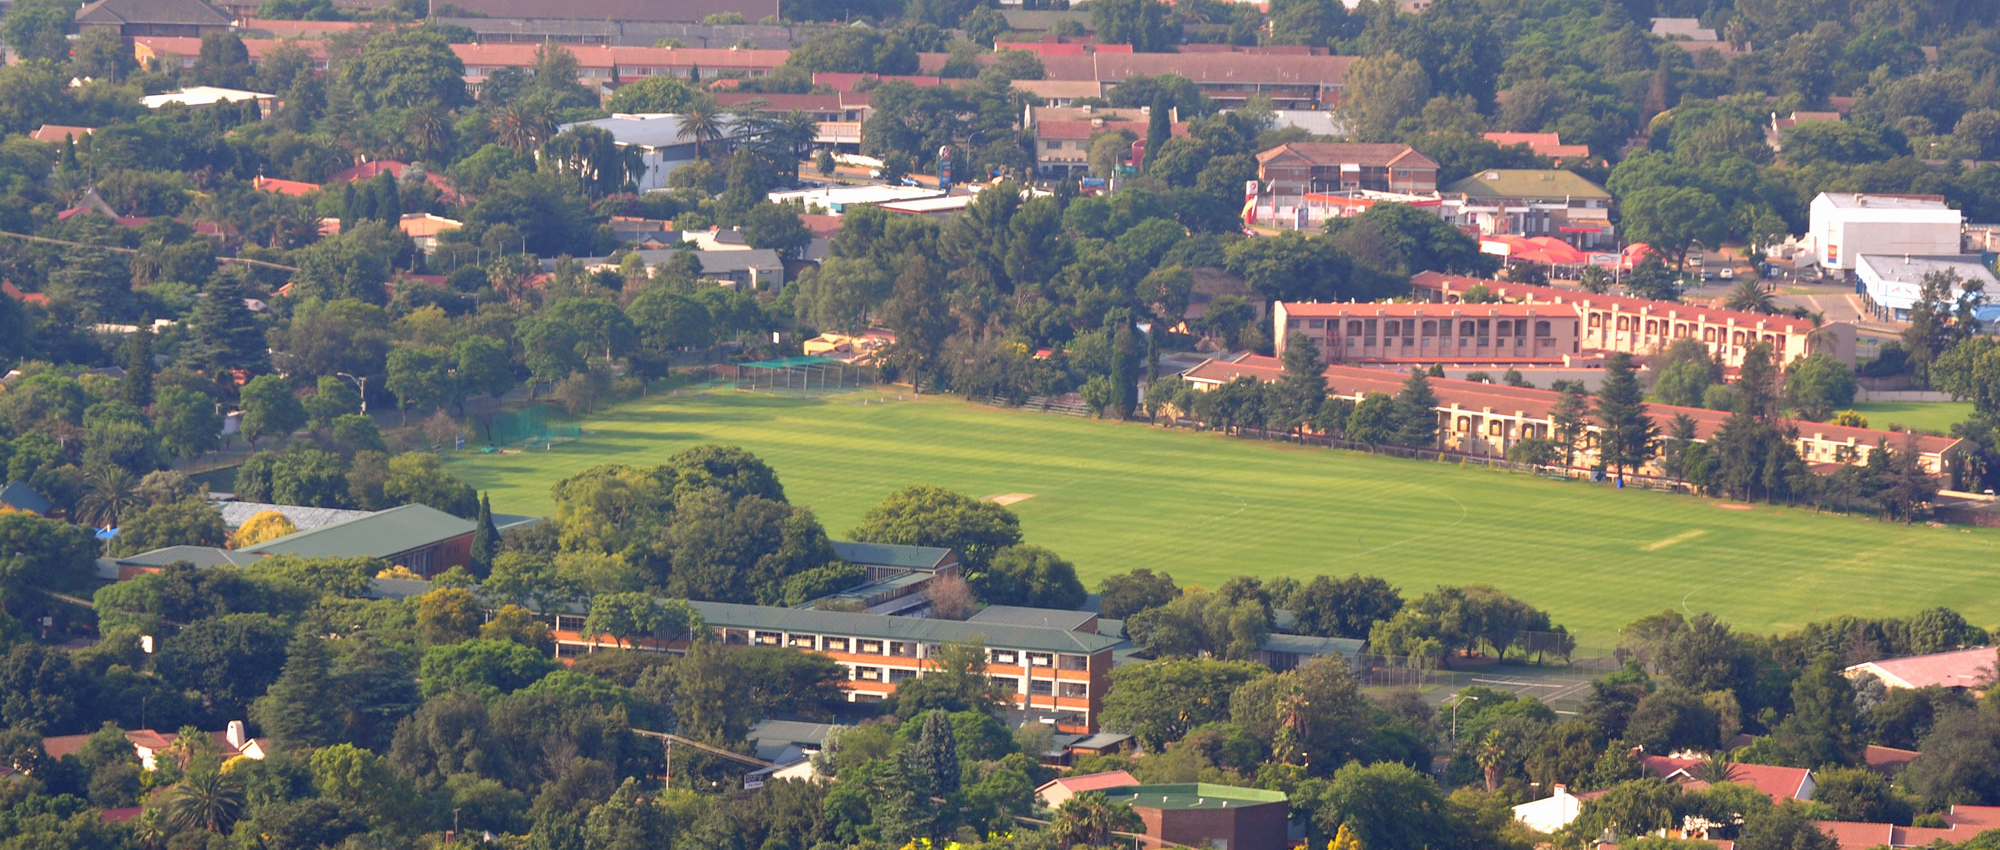 Northcliff High School is a centre of excellence - a safe, secure, disciplined and caring environment for all. As a proudly independent state high school, we offer a firm foundation of traditions and values which have been carried through from when the school was established in 1969 to today.